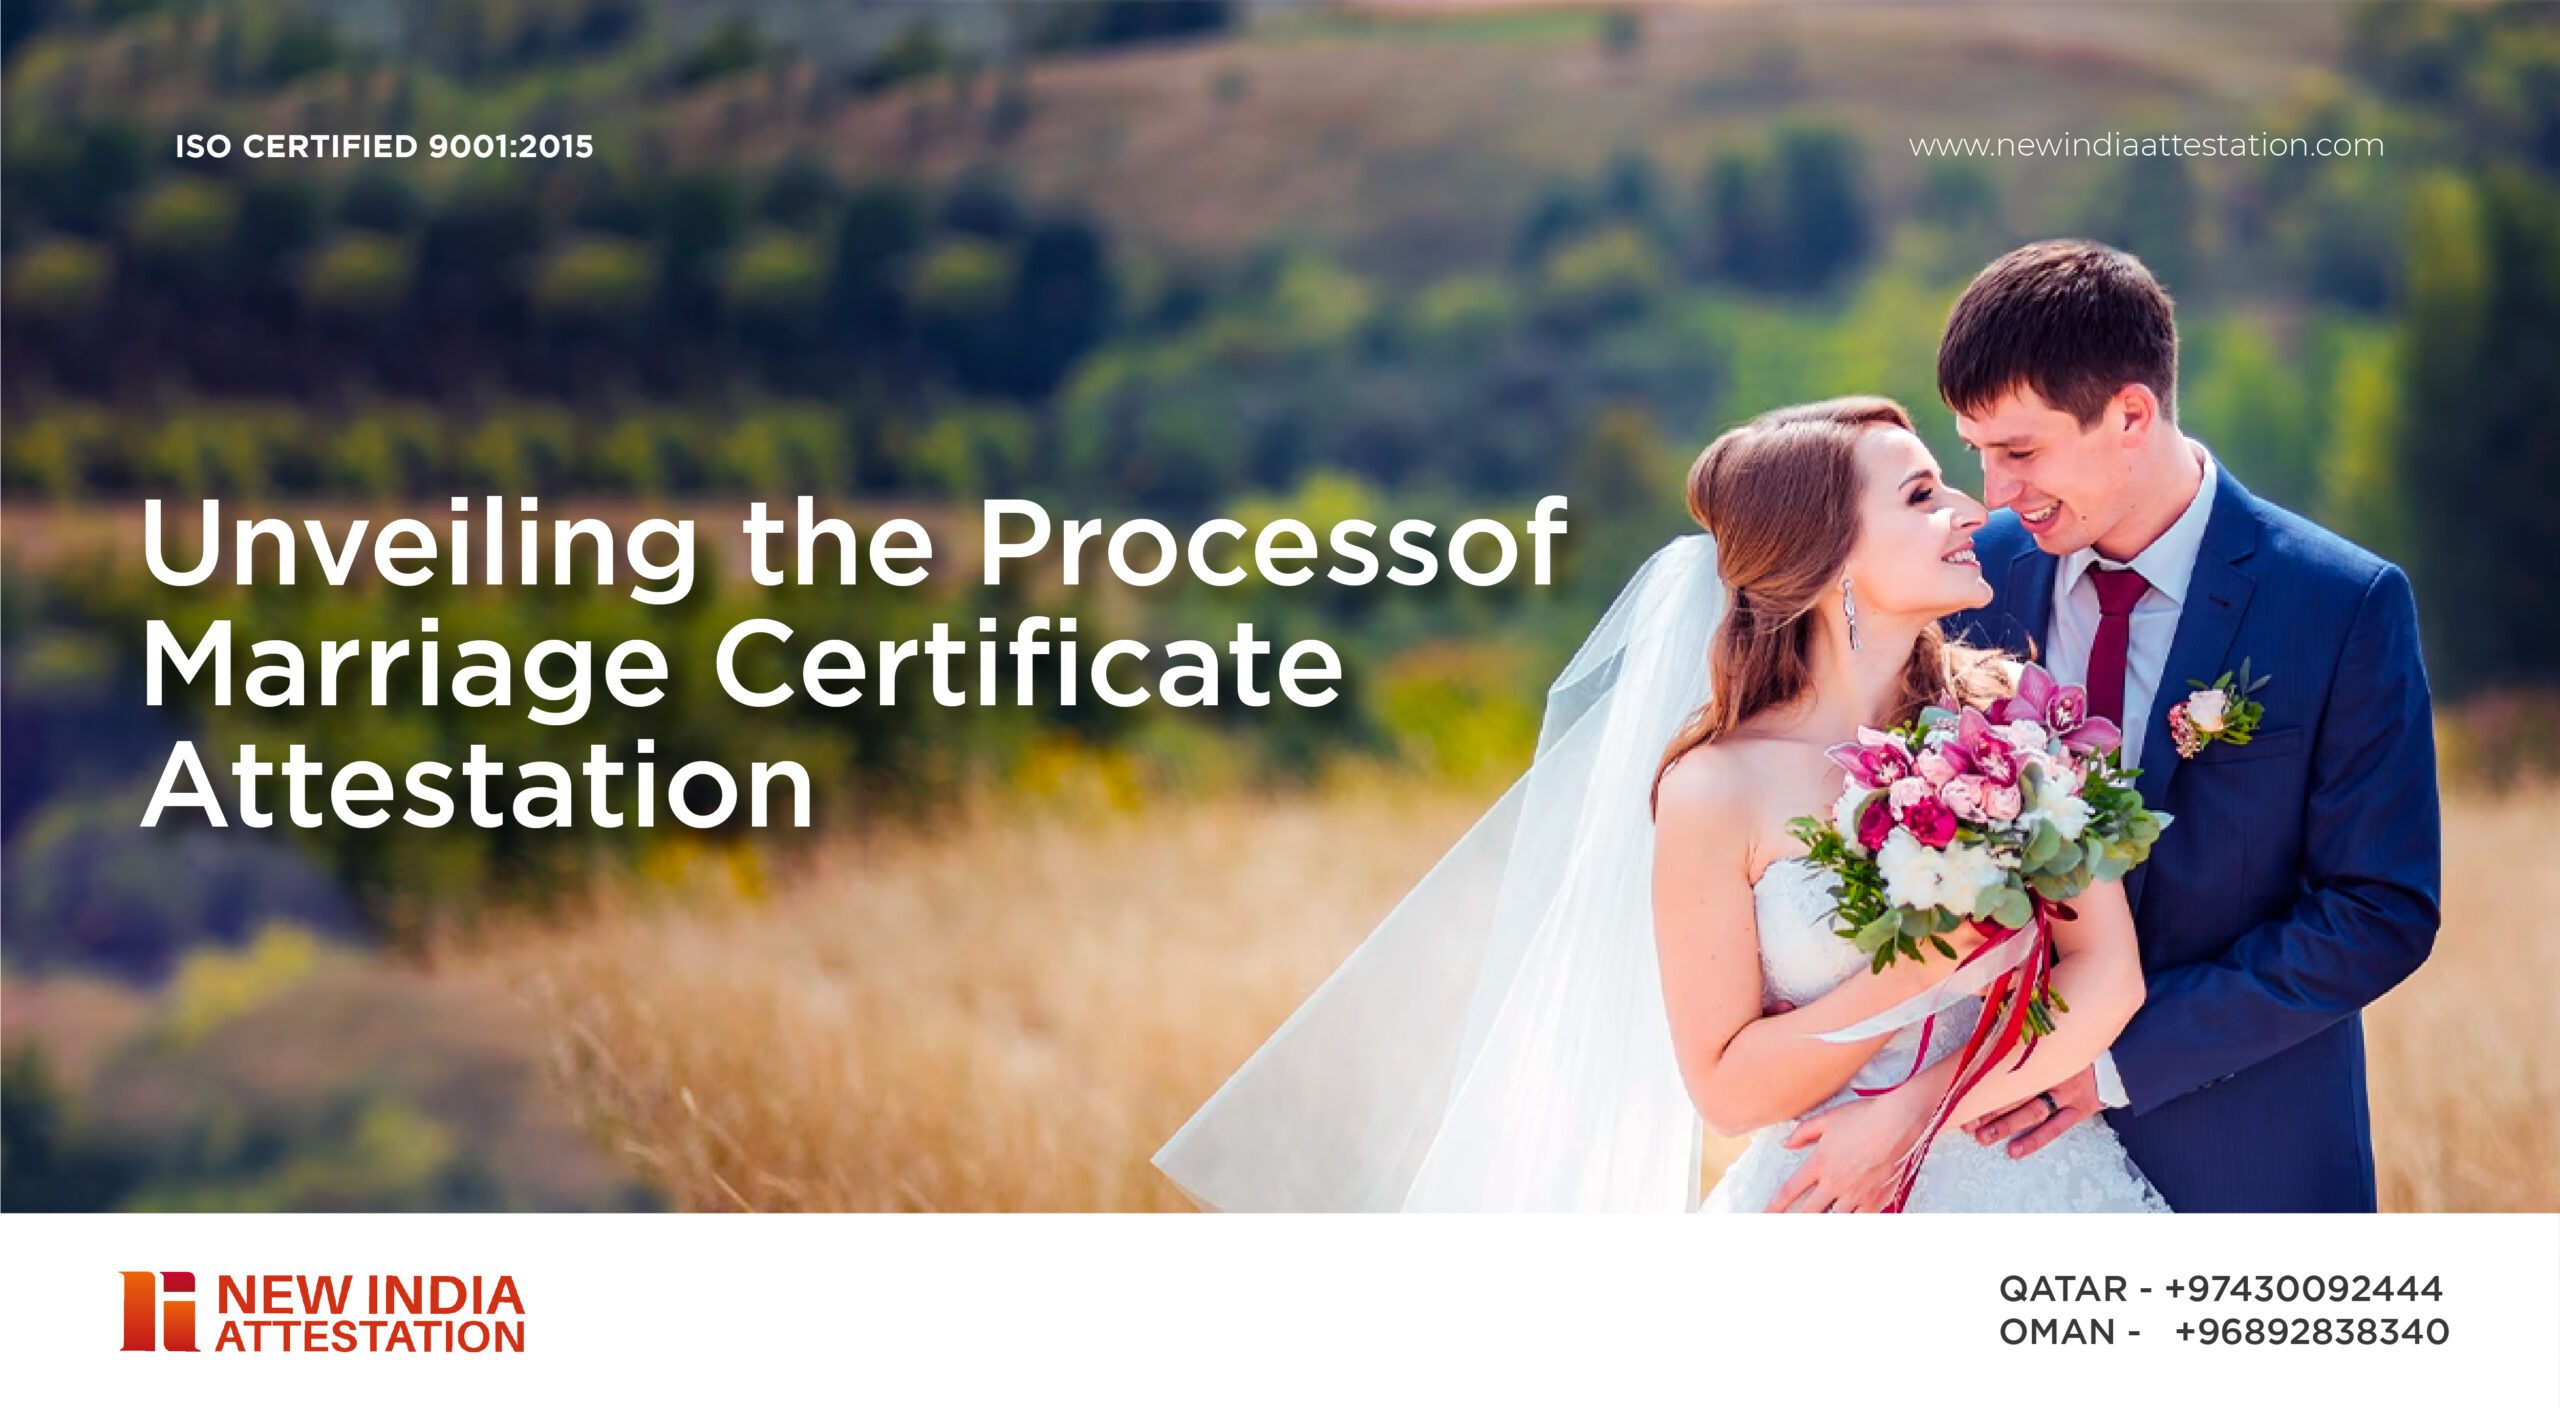 Marrige Certificate Attestation Services in Qatar